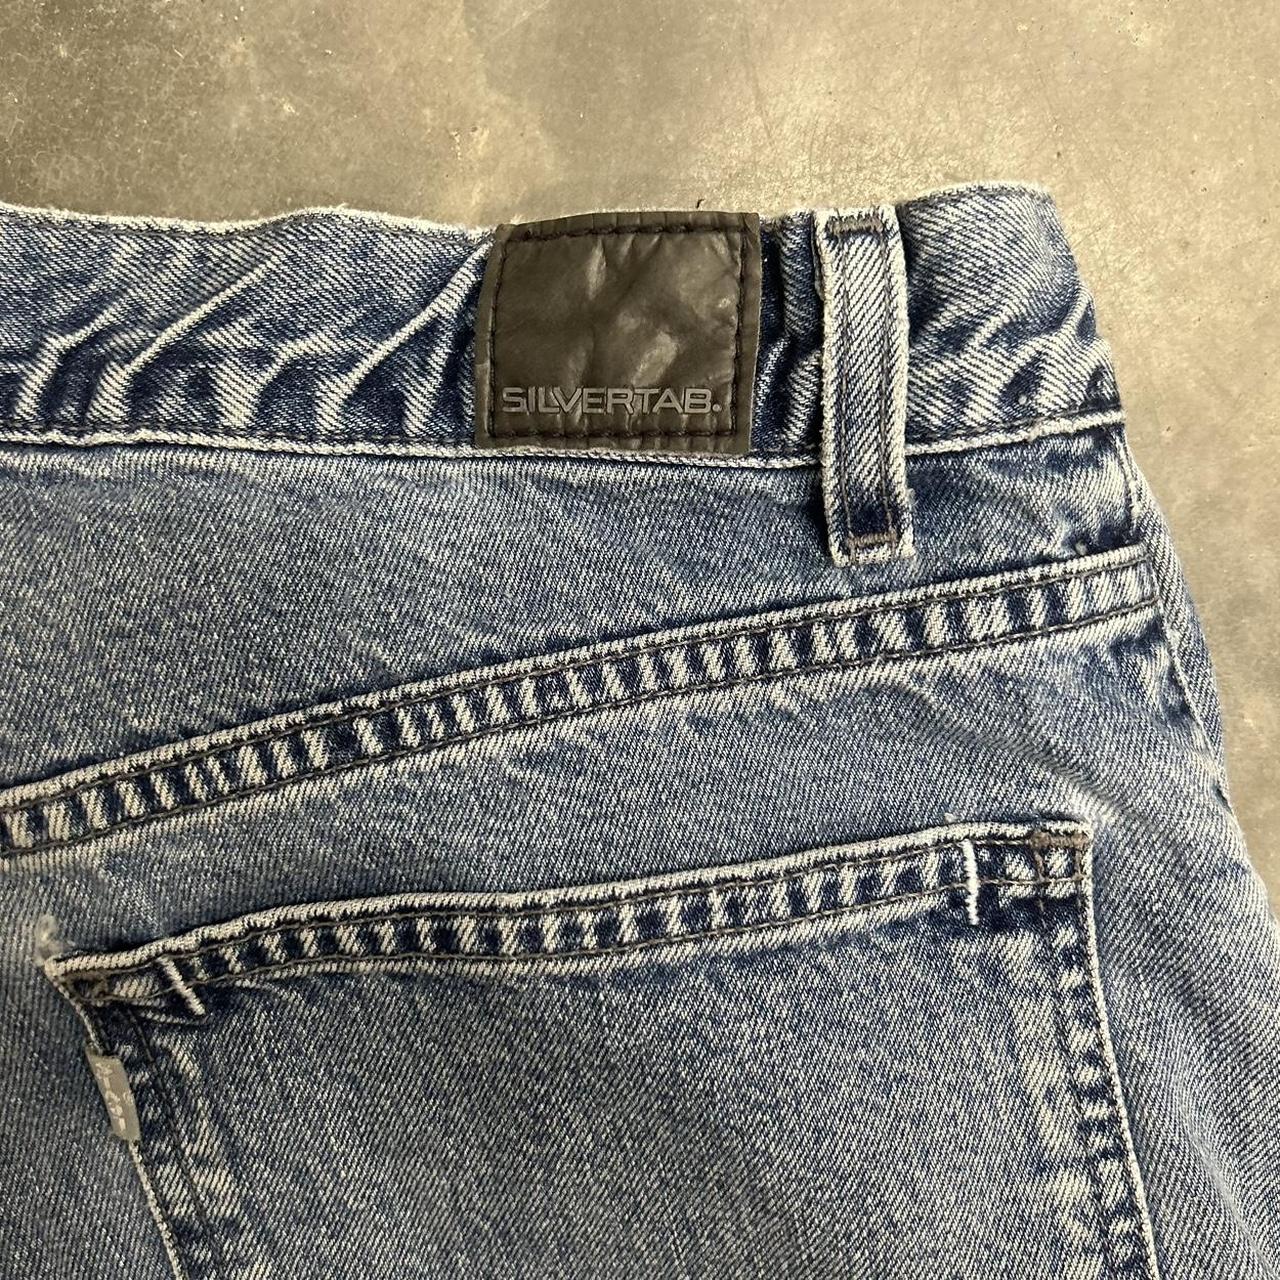 Levis Silver tab ℹ️ Silvertab Levi’s made in the... - Depop